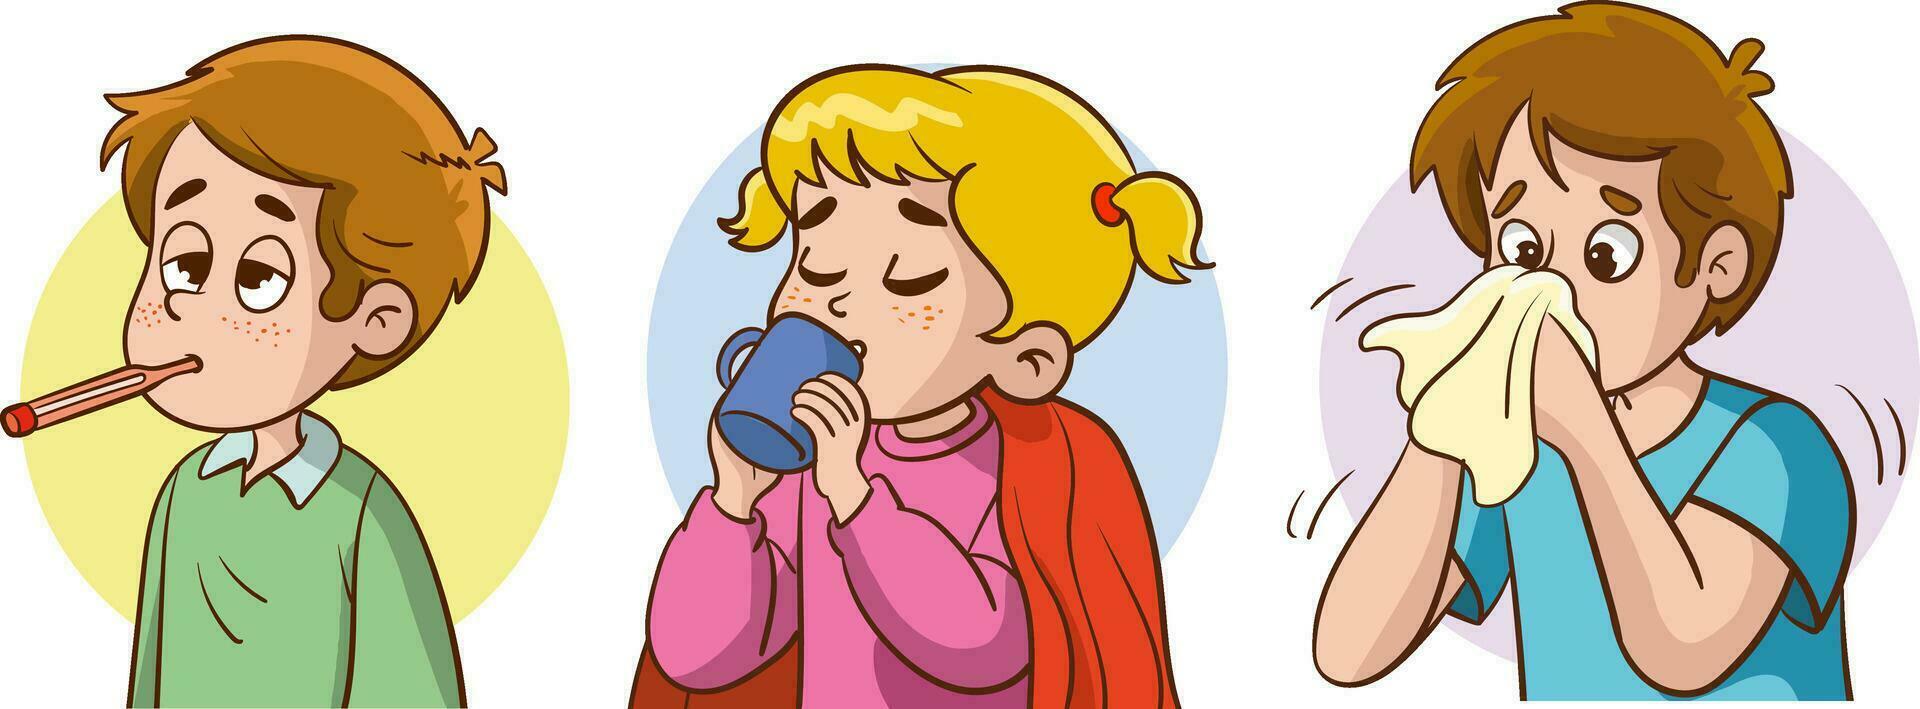 vector illustration of a kids Feeling Sick and Coughing